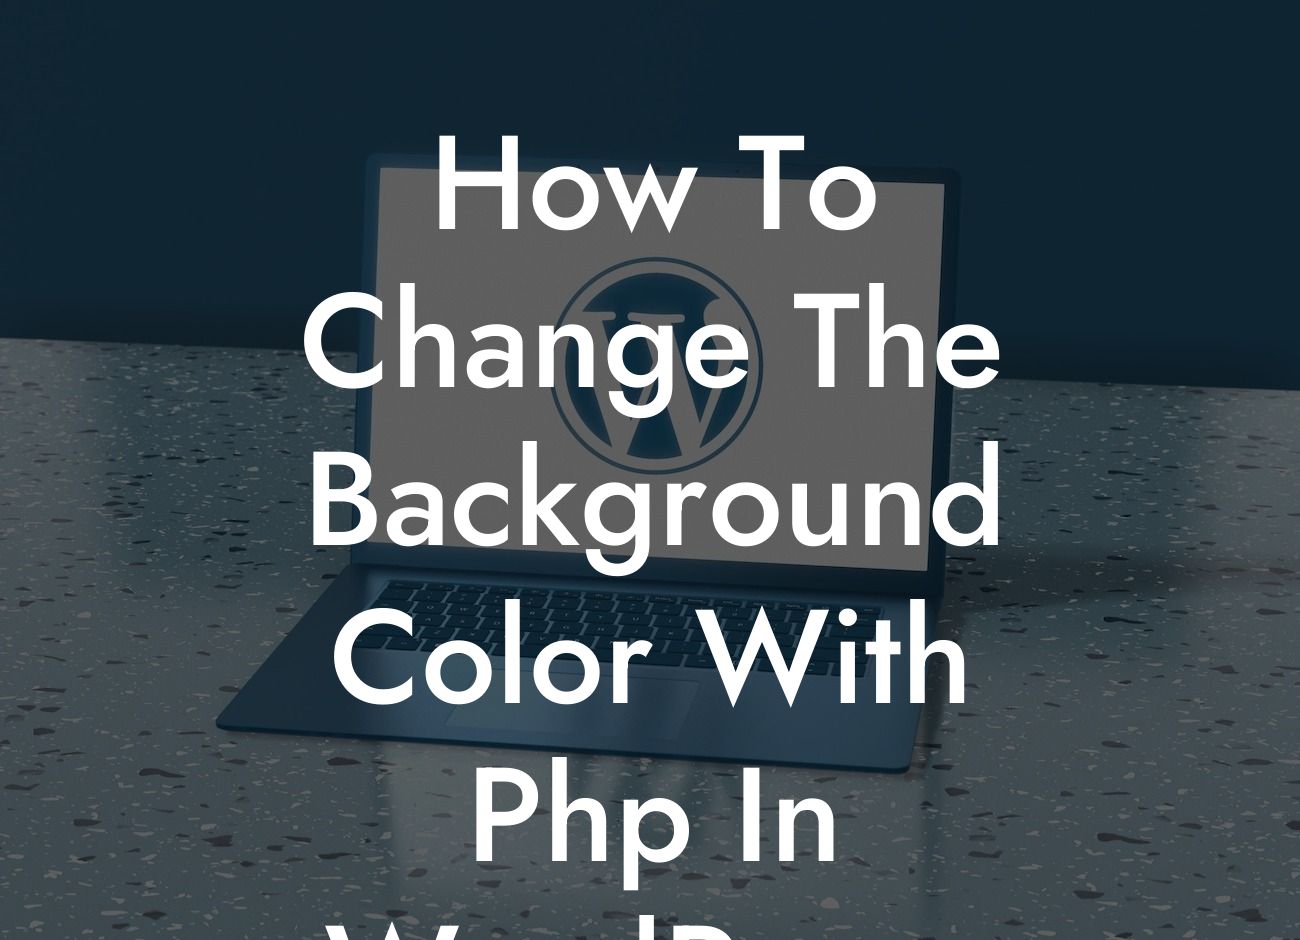 How To Change The Background Color With Php In WordPress